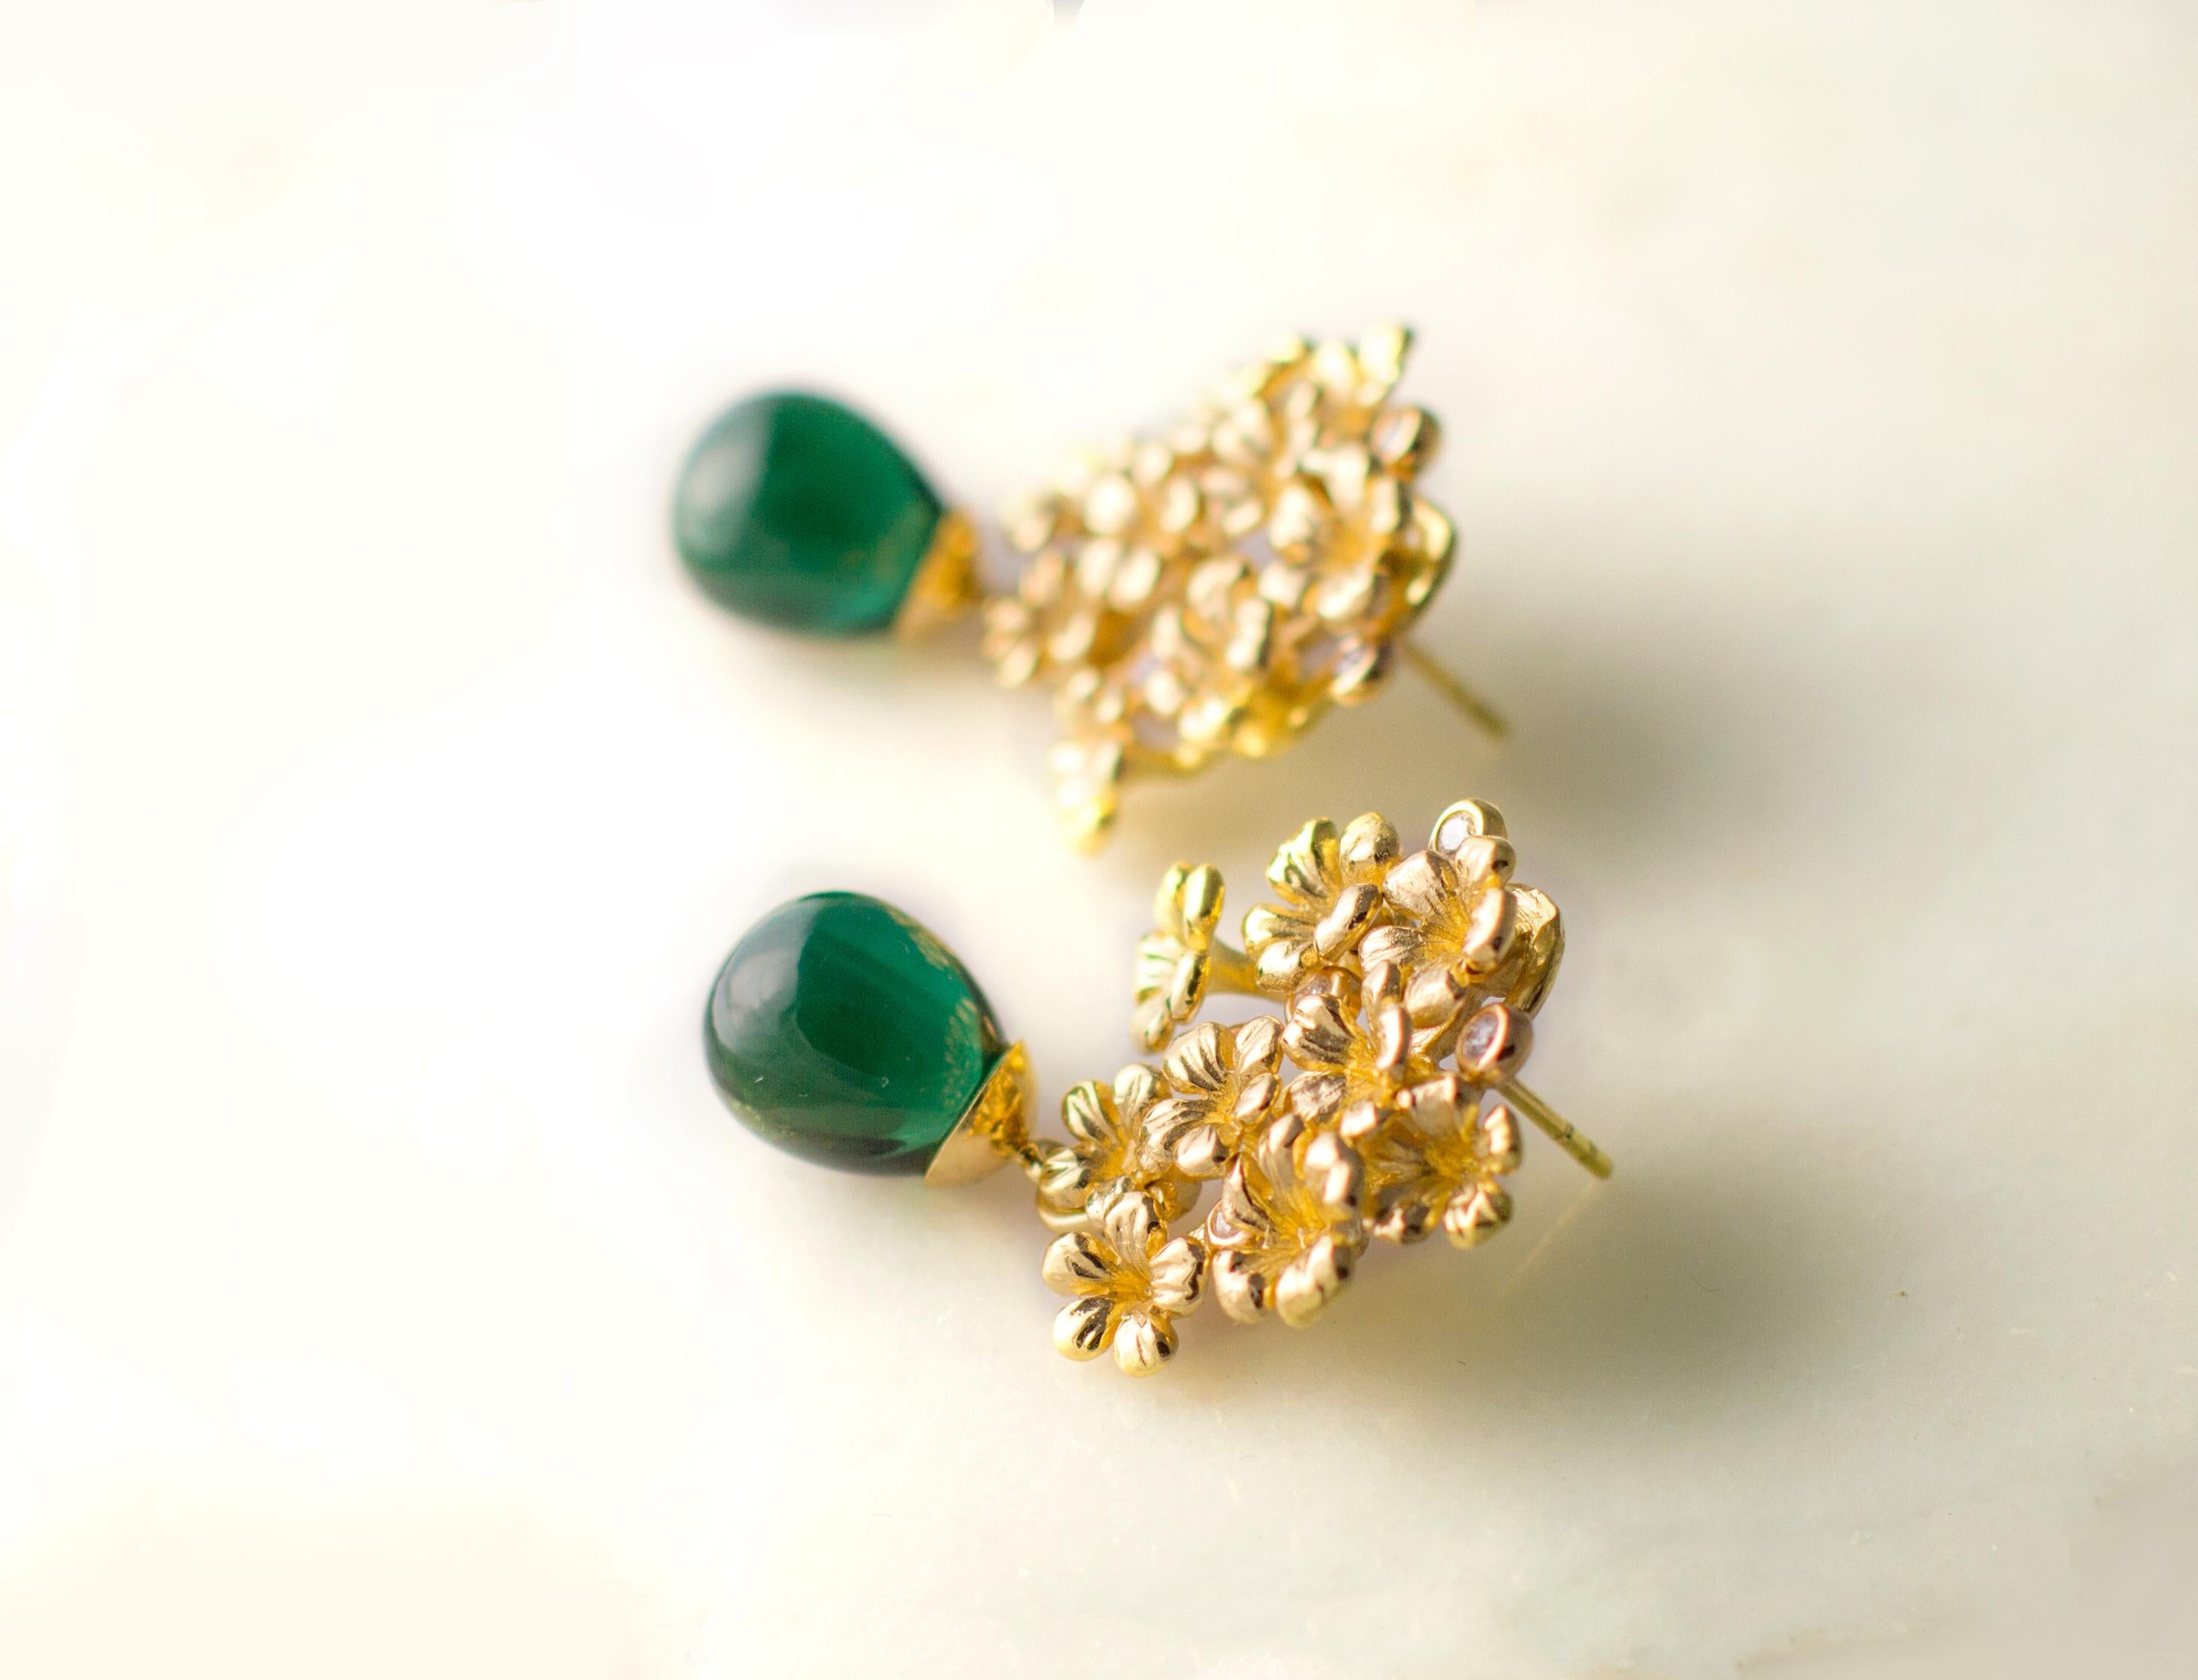 These Plum Flowers cocktail earrings with green cabochon treated ambers are made of 18 karat yellow gold and encrusted with 10 natural round diamonds. This is a piece from the contemporary jewellery collection, which was featured in a review by